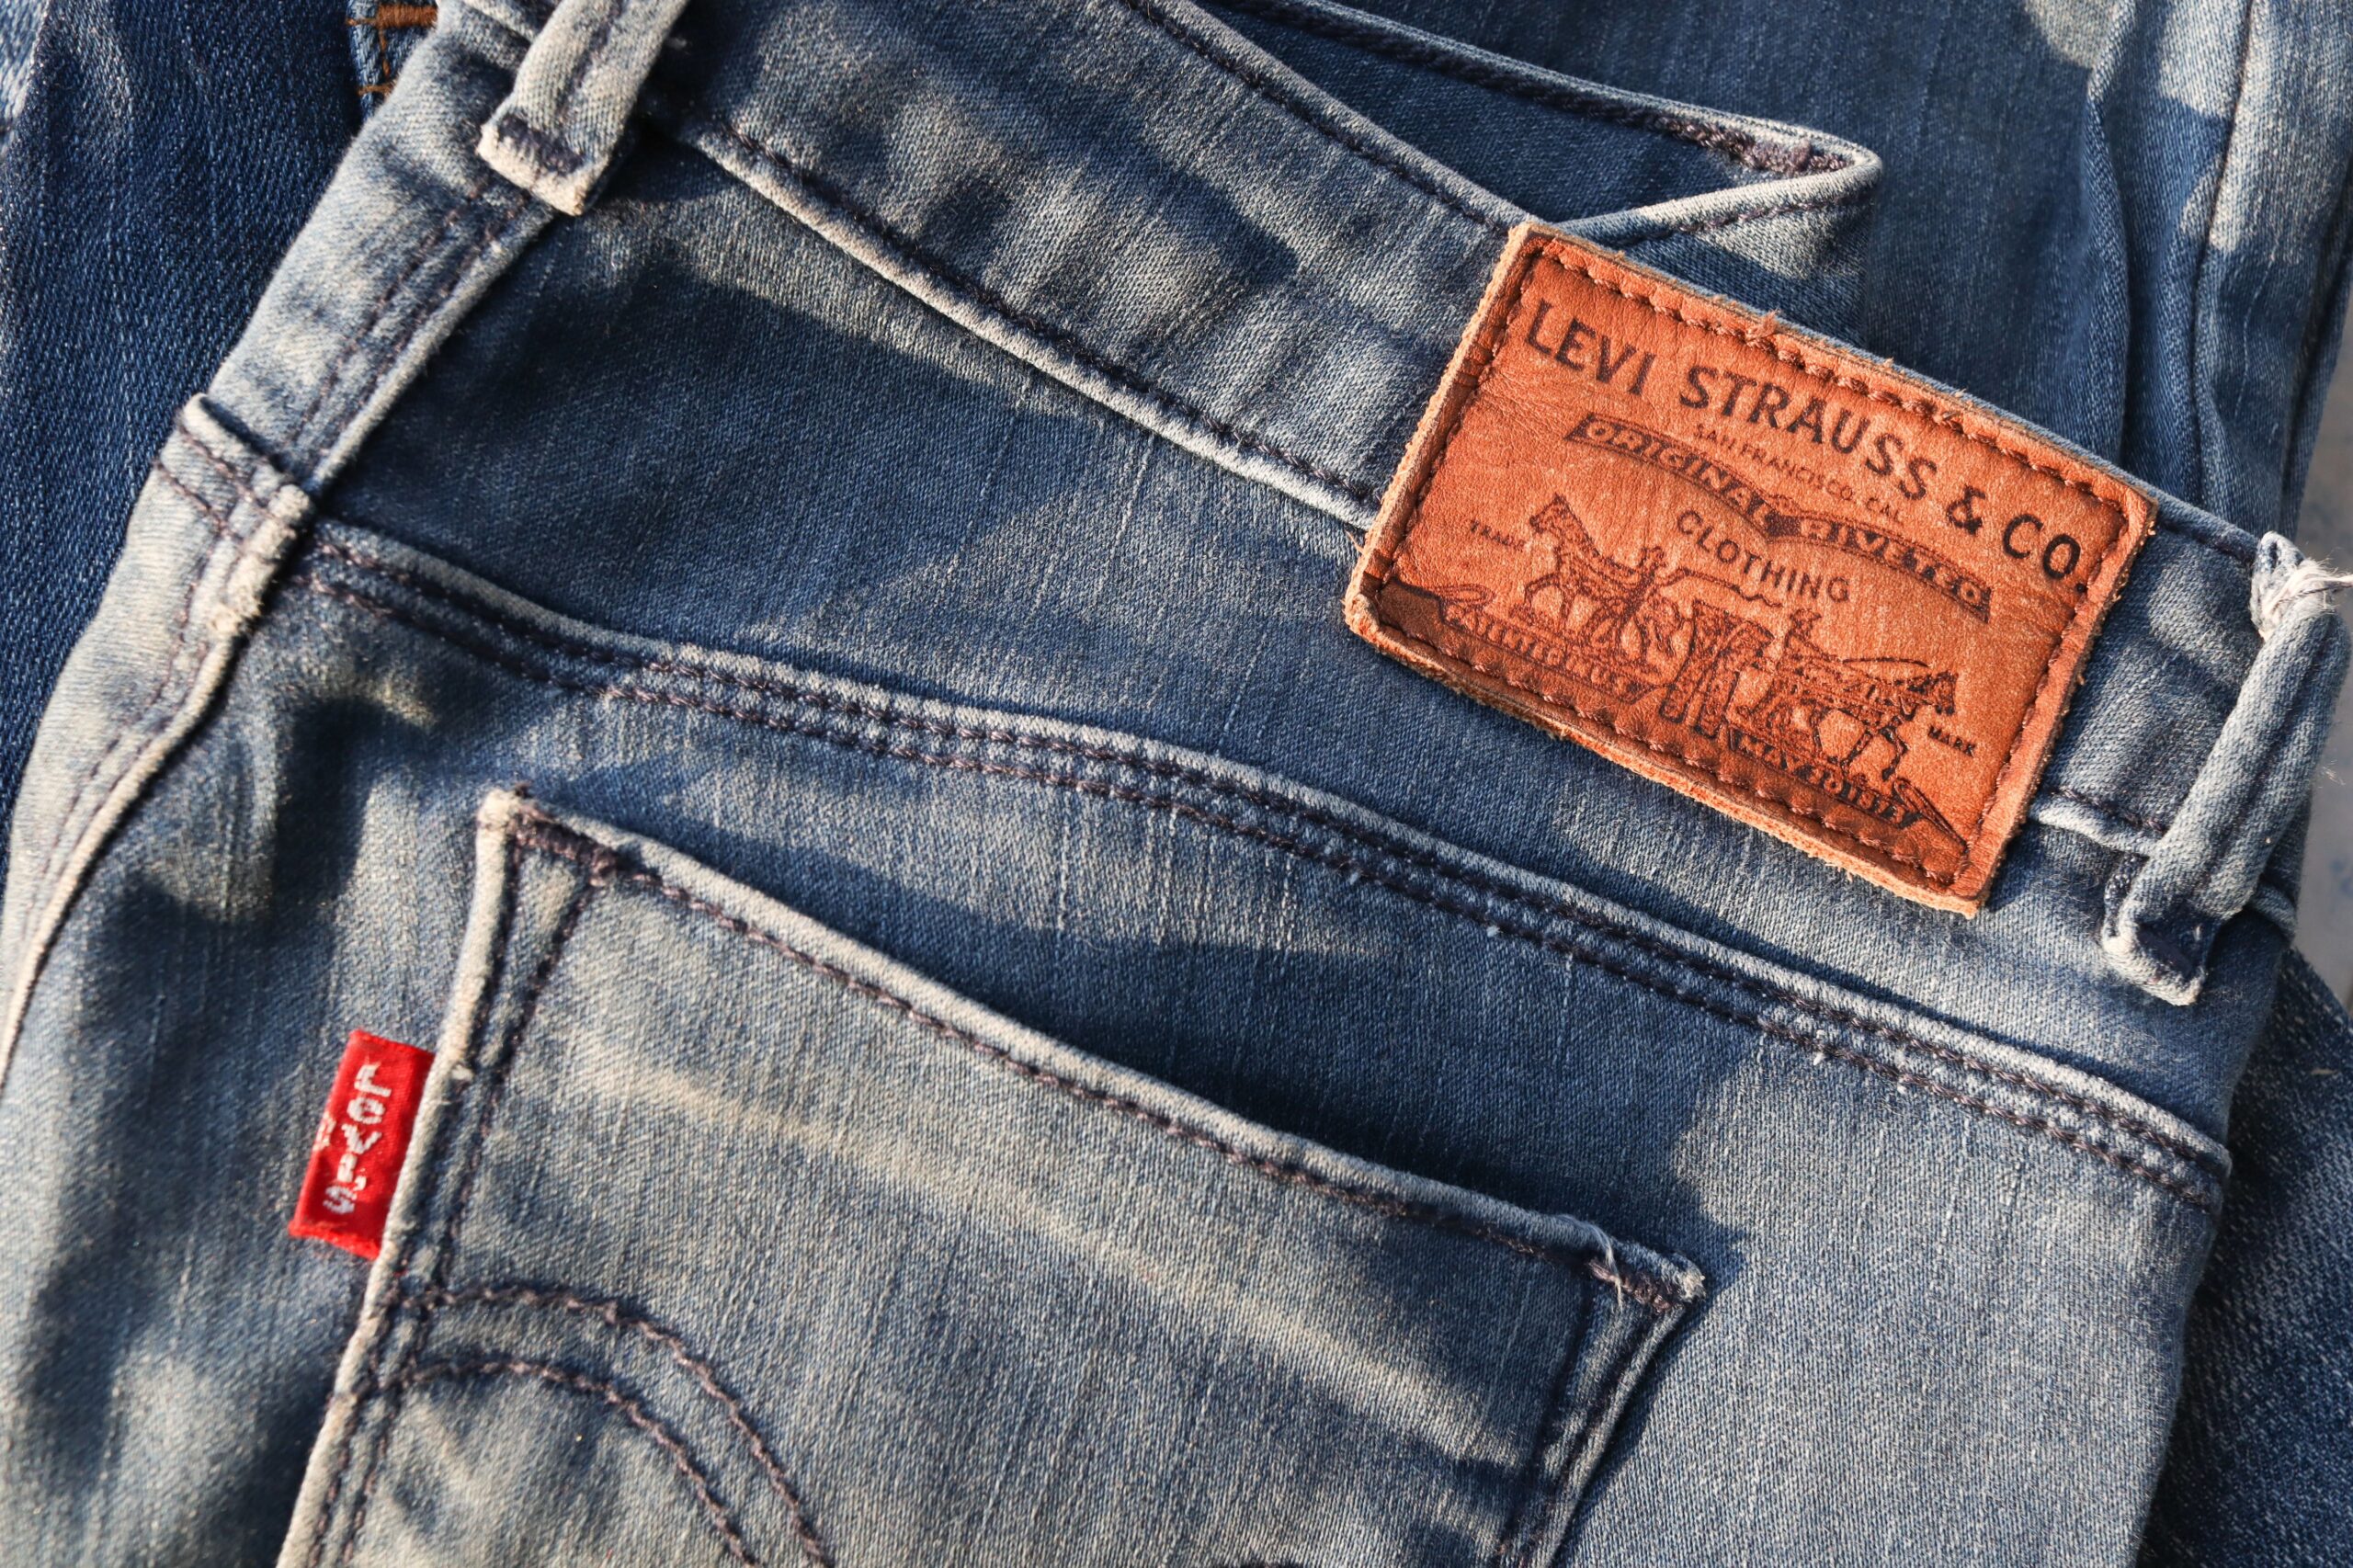 Levi Strauss Sues Italy’s Brunello Cucinelli Over Trademarked Tab